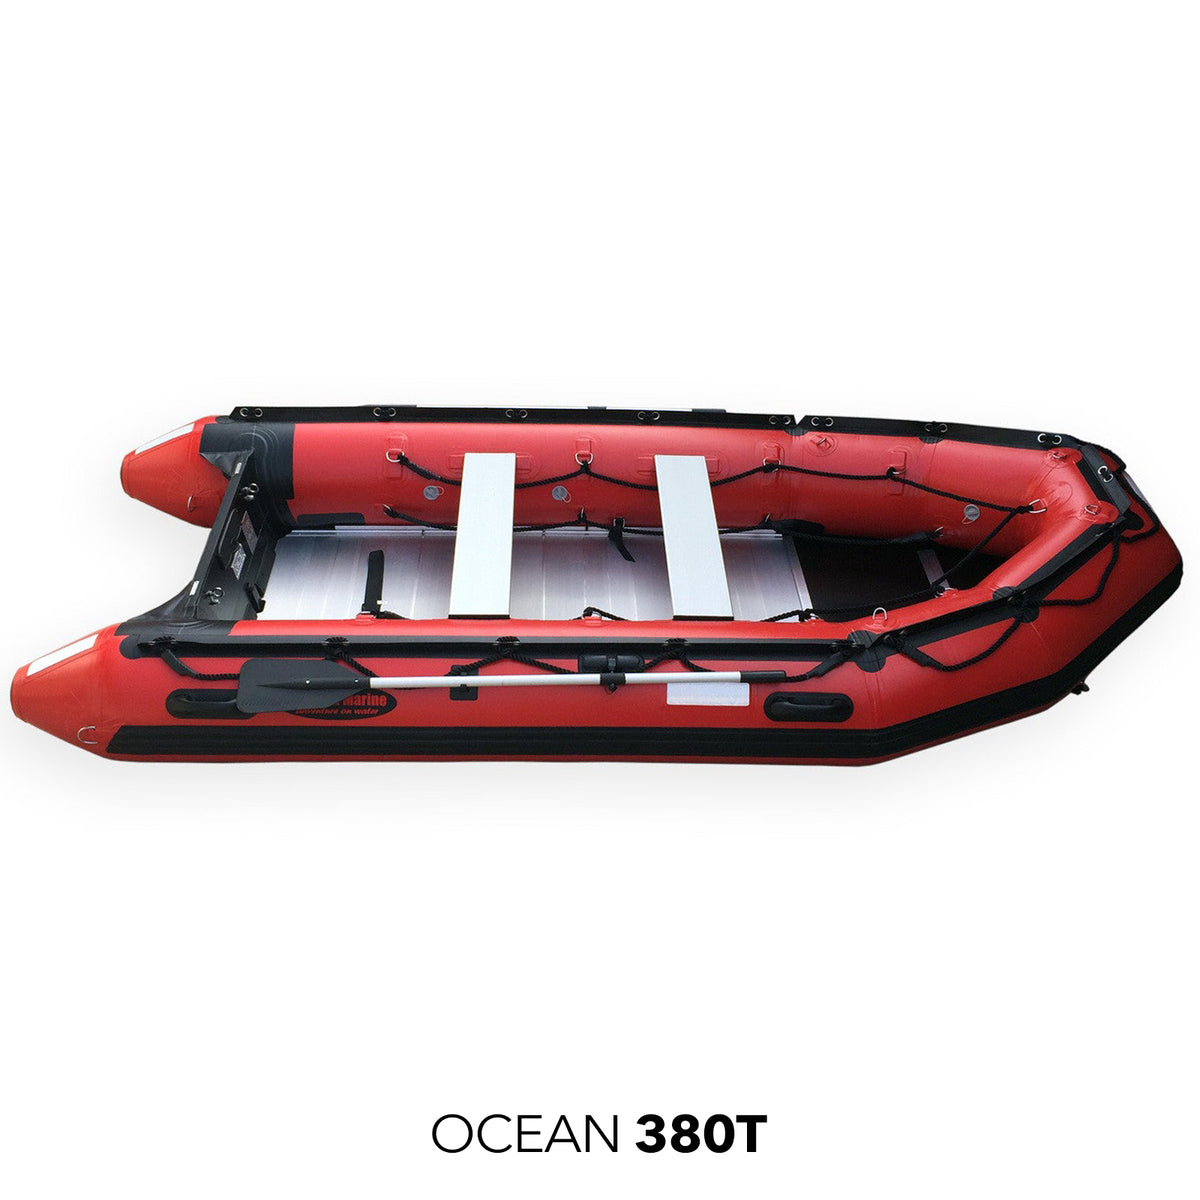 380-MIL-HD (12'6) INMAR Military Grade Inflatable Boat, Rescue equipment